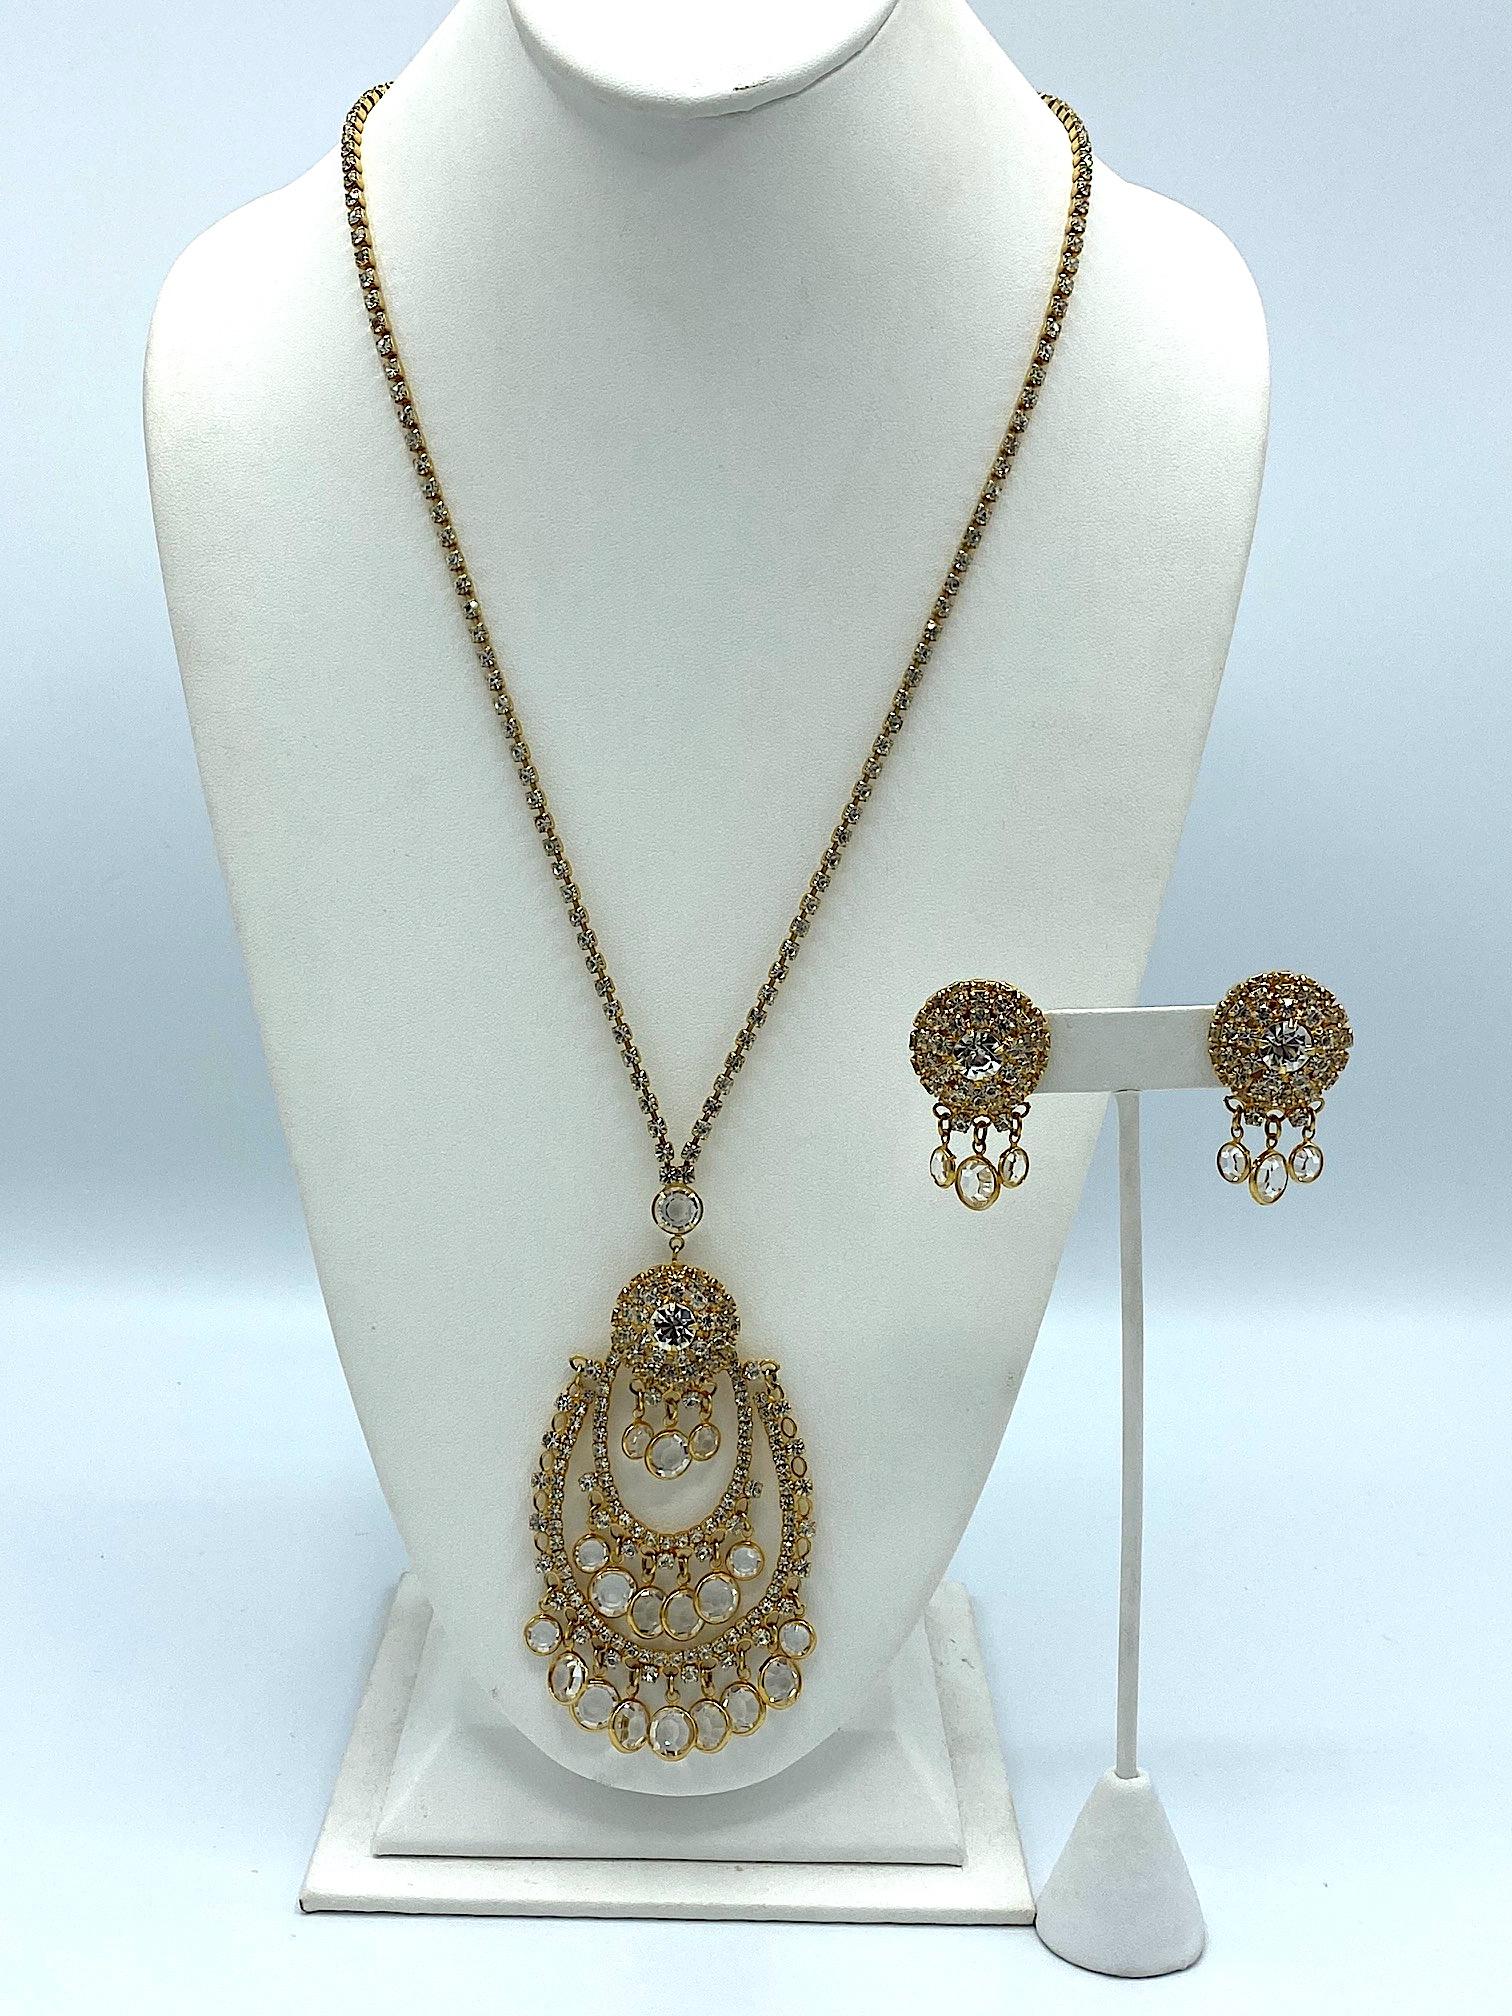 From the Golden Age of Rhinestones is this stunning necklace and earring set circa 1960 to 1965. The necklace and earrings are gold plate with prong set rhinestones and faceted round crystal dangles. The necklace strand of rhinestones is 24 inches